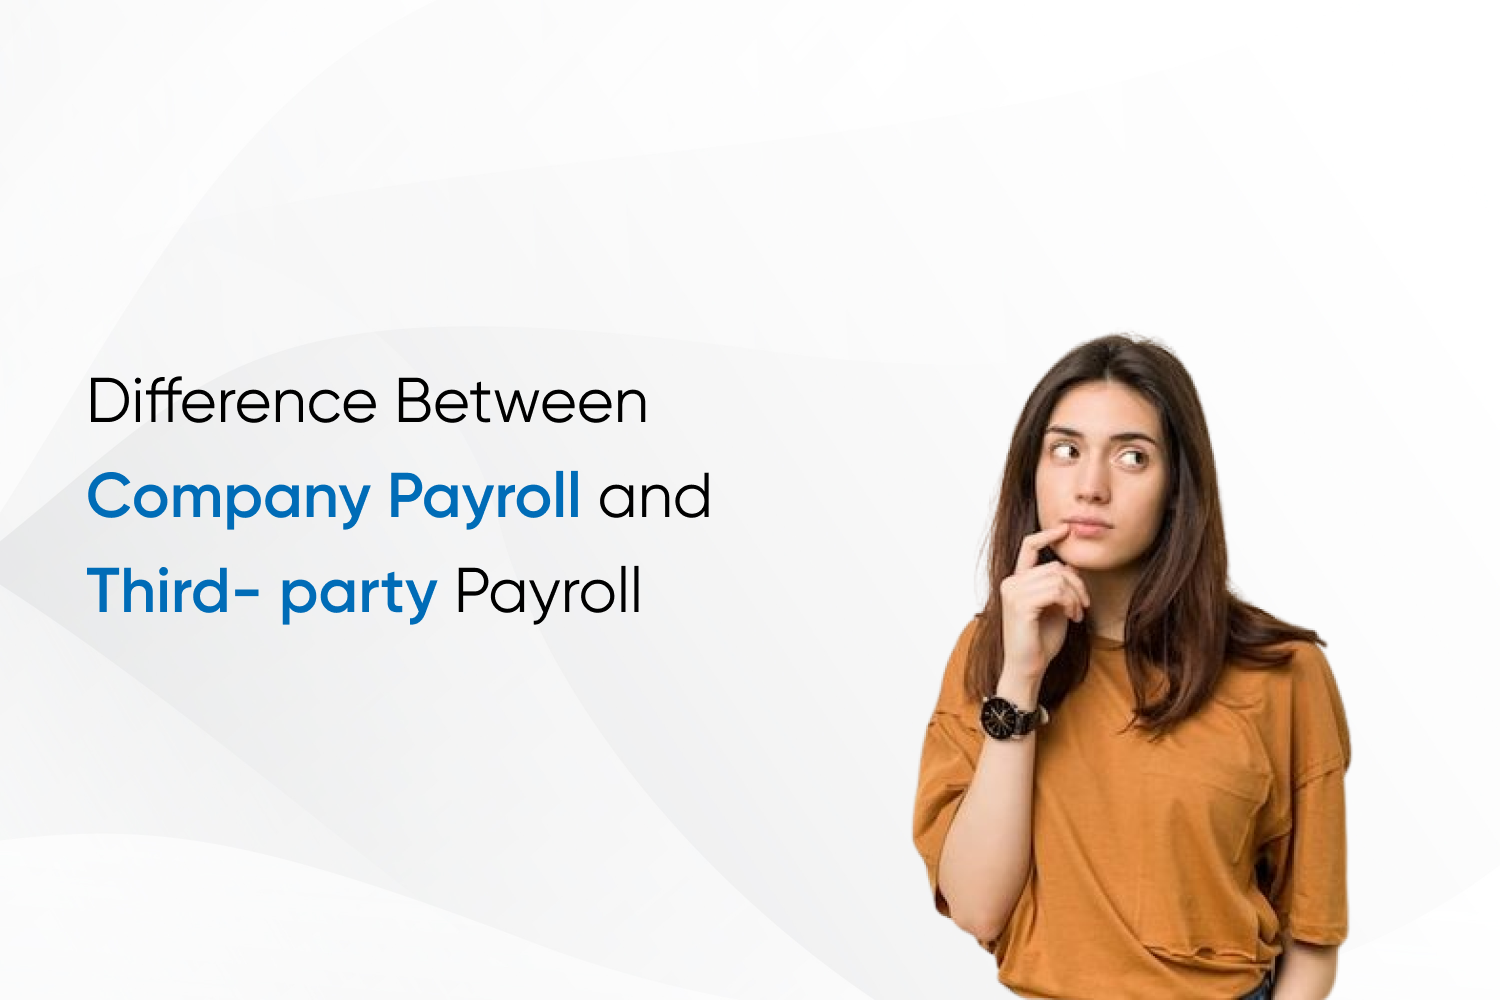 Difference Between Company Payroll and Third- party Payroll